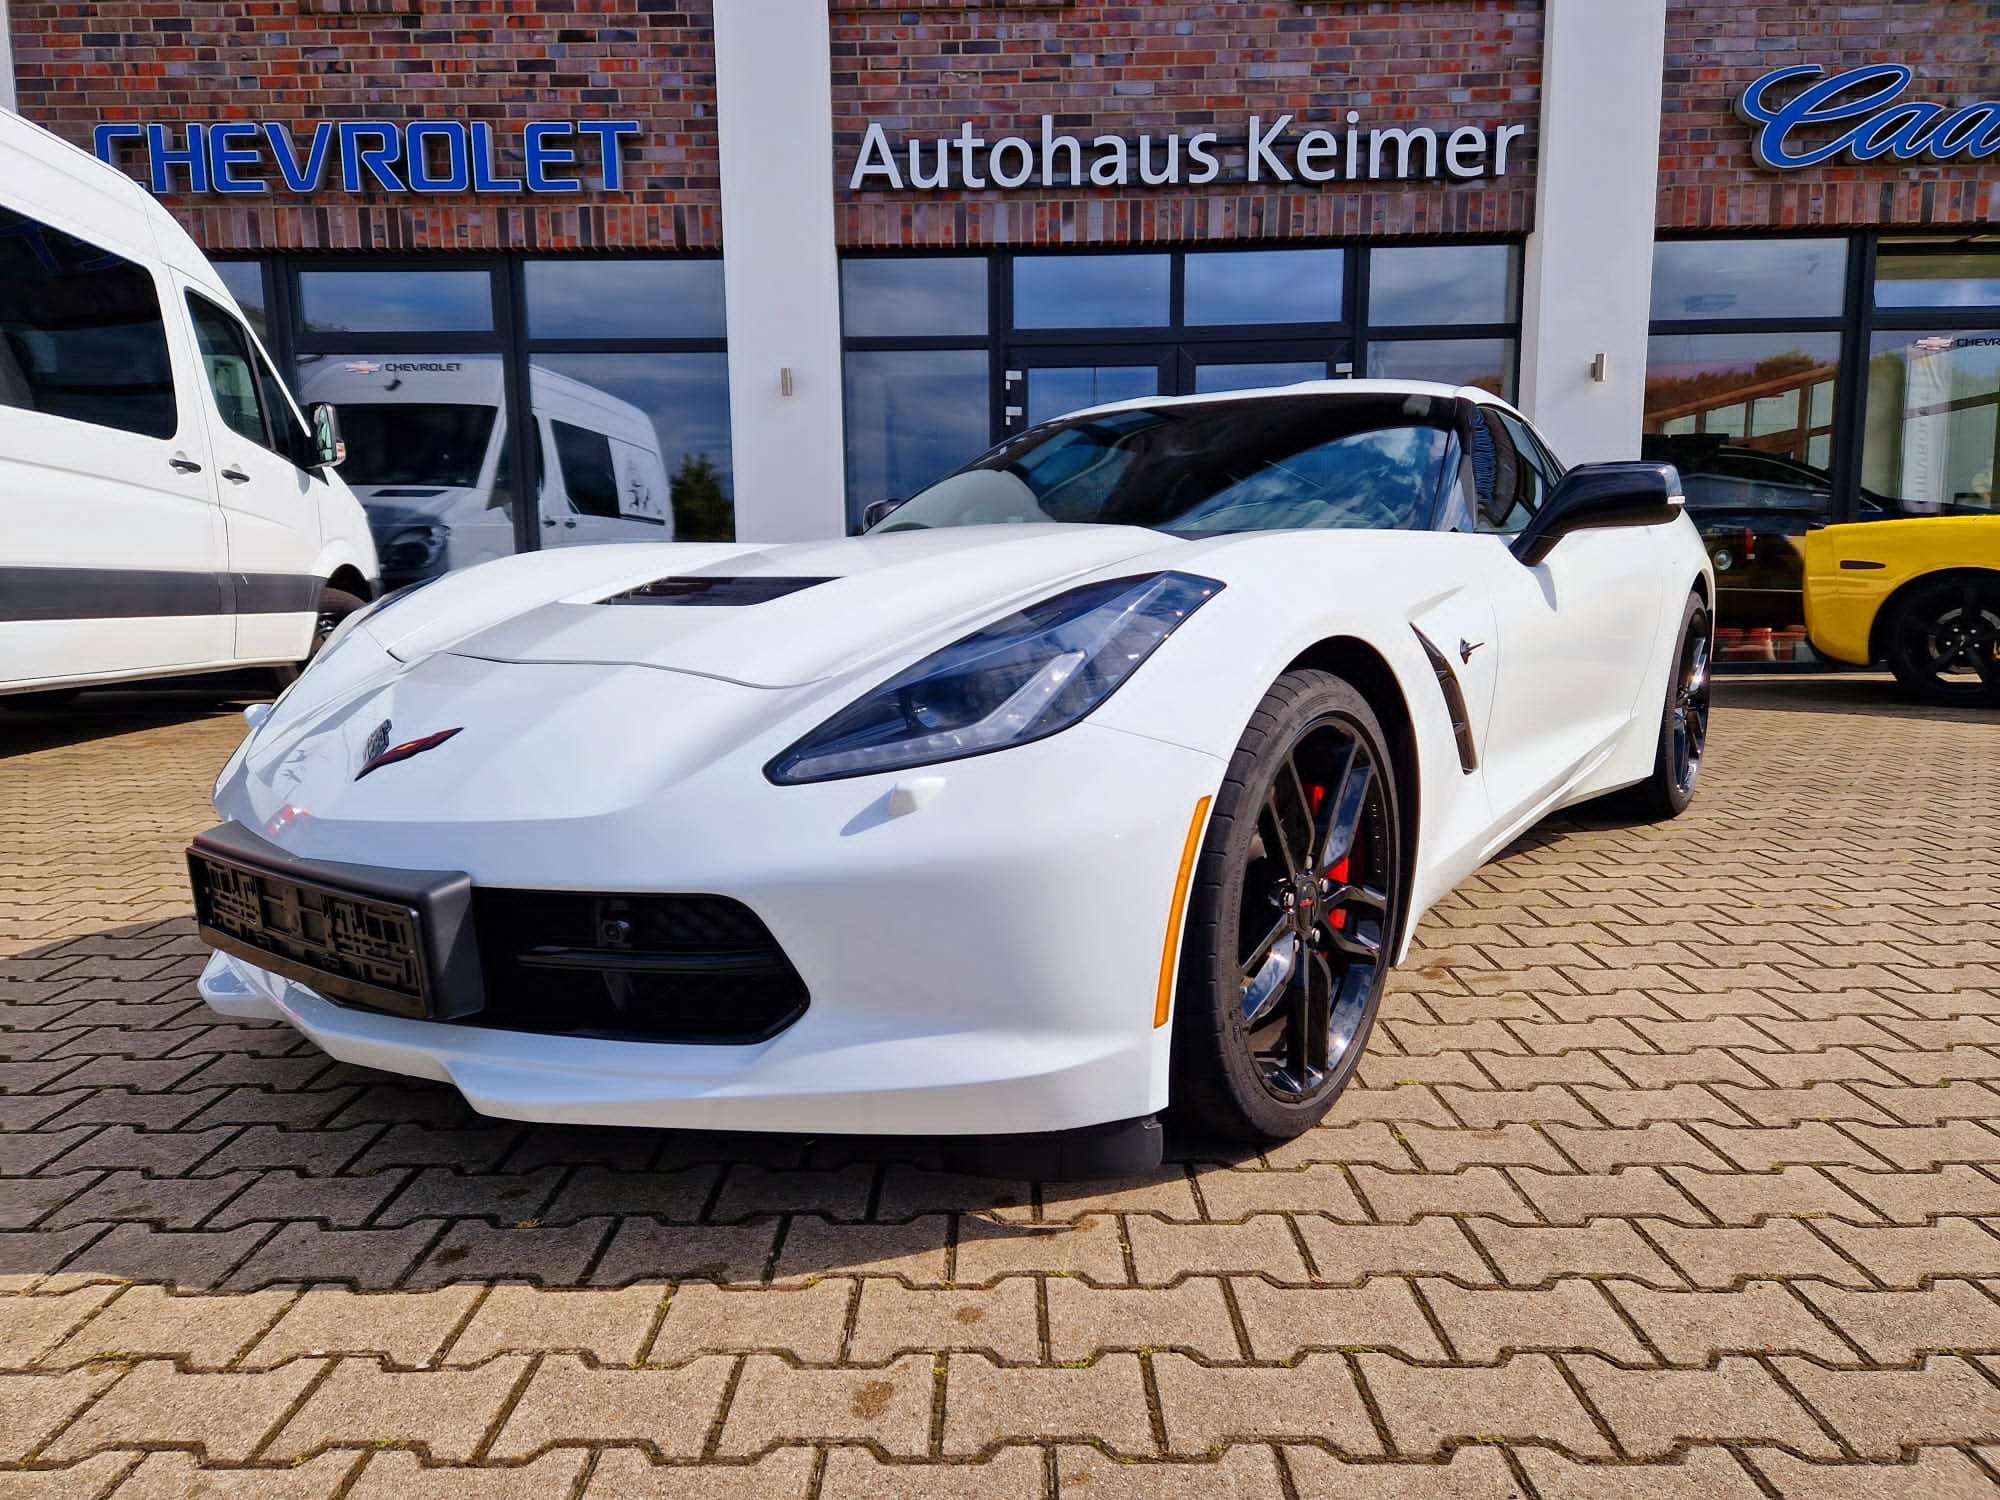 Corvette C7 Coupe in White used in Vechta for € 62,900.-